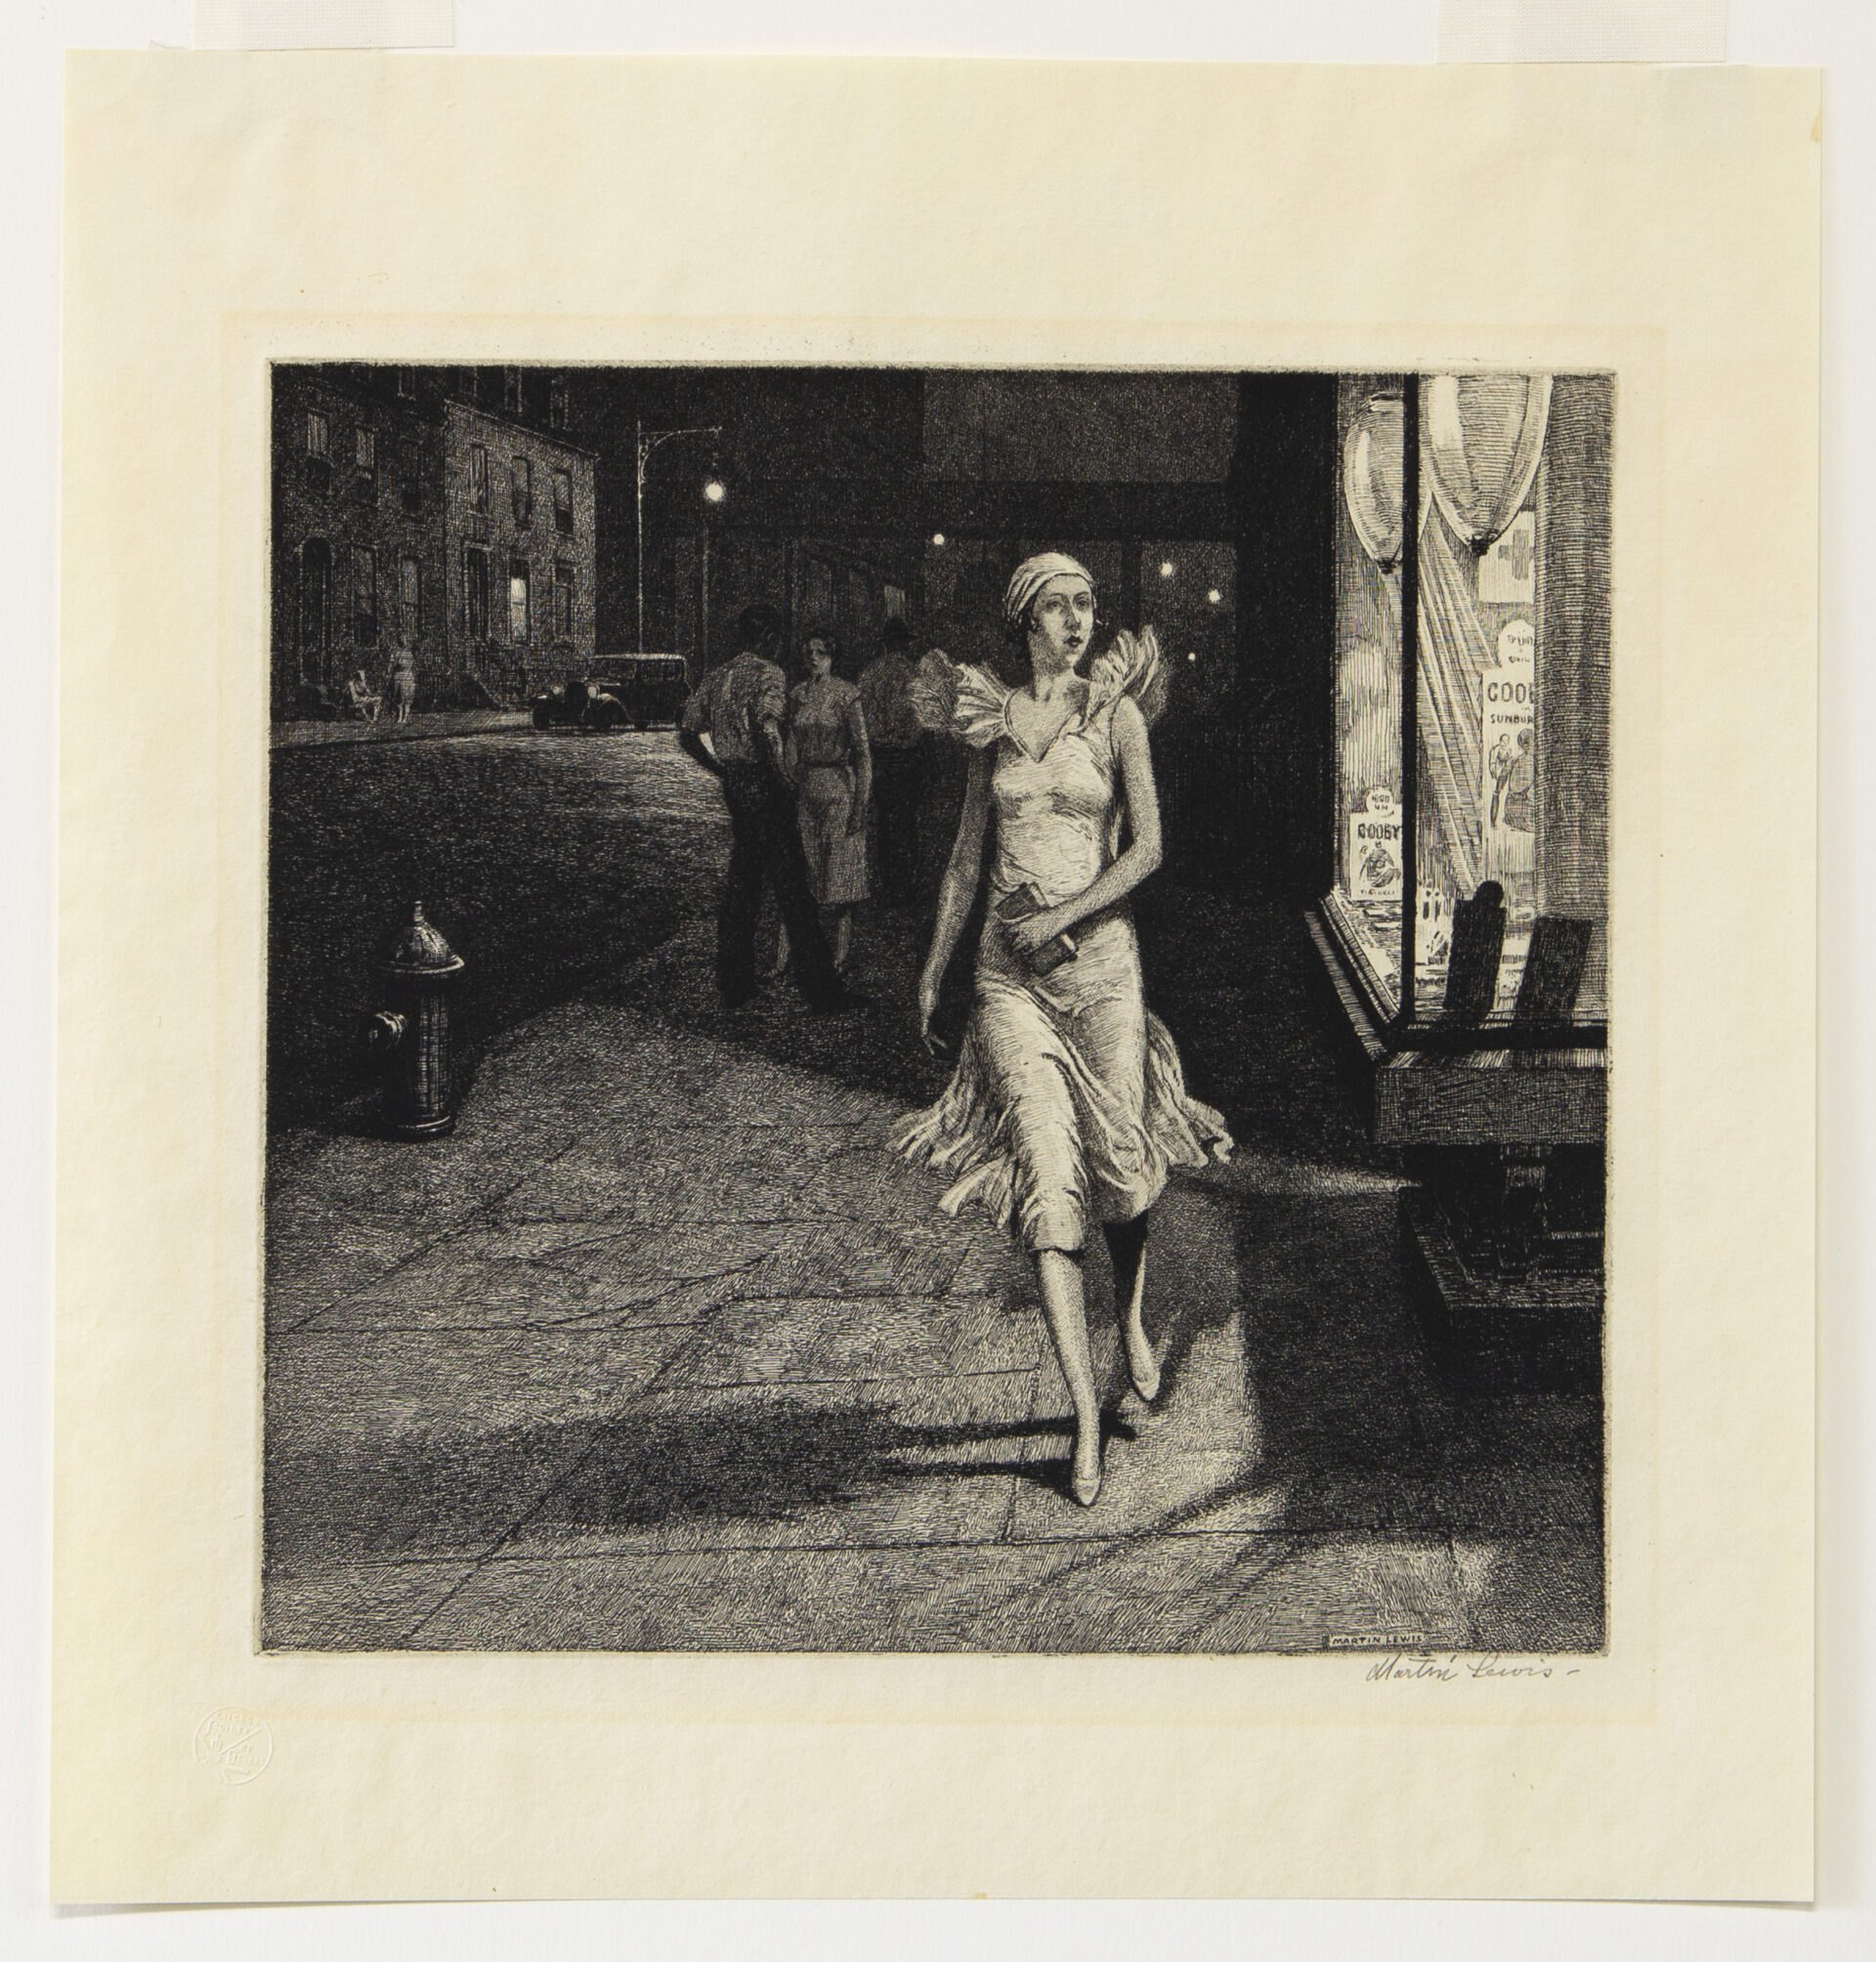 Martin Lewis Night in New York, 1932 Etching Paper Dimensions: 12 x 11 1/2 inches (30.5 x 29.2 cm) Image Dimensions: 8 3/8 x 8 7/8 inches (21.3 x 22.5 cm) Framed Dimensions: 16 1/2 x 16 1/2 inches (41.9 x 41.9 cm) Edition of 125